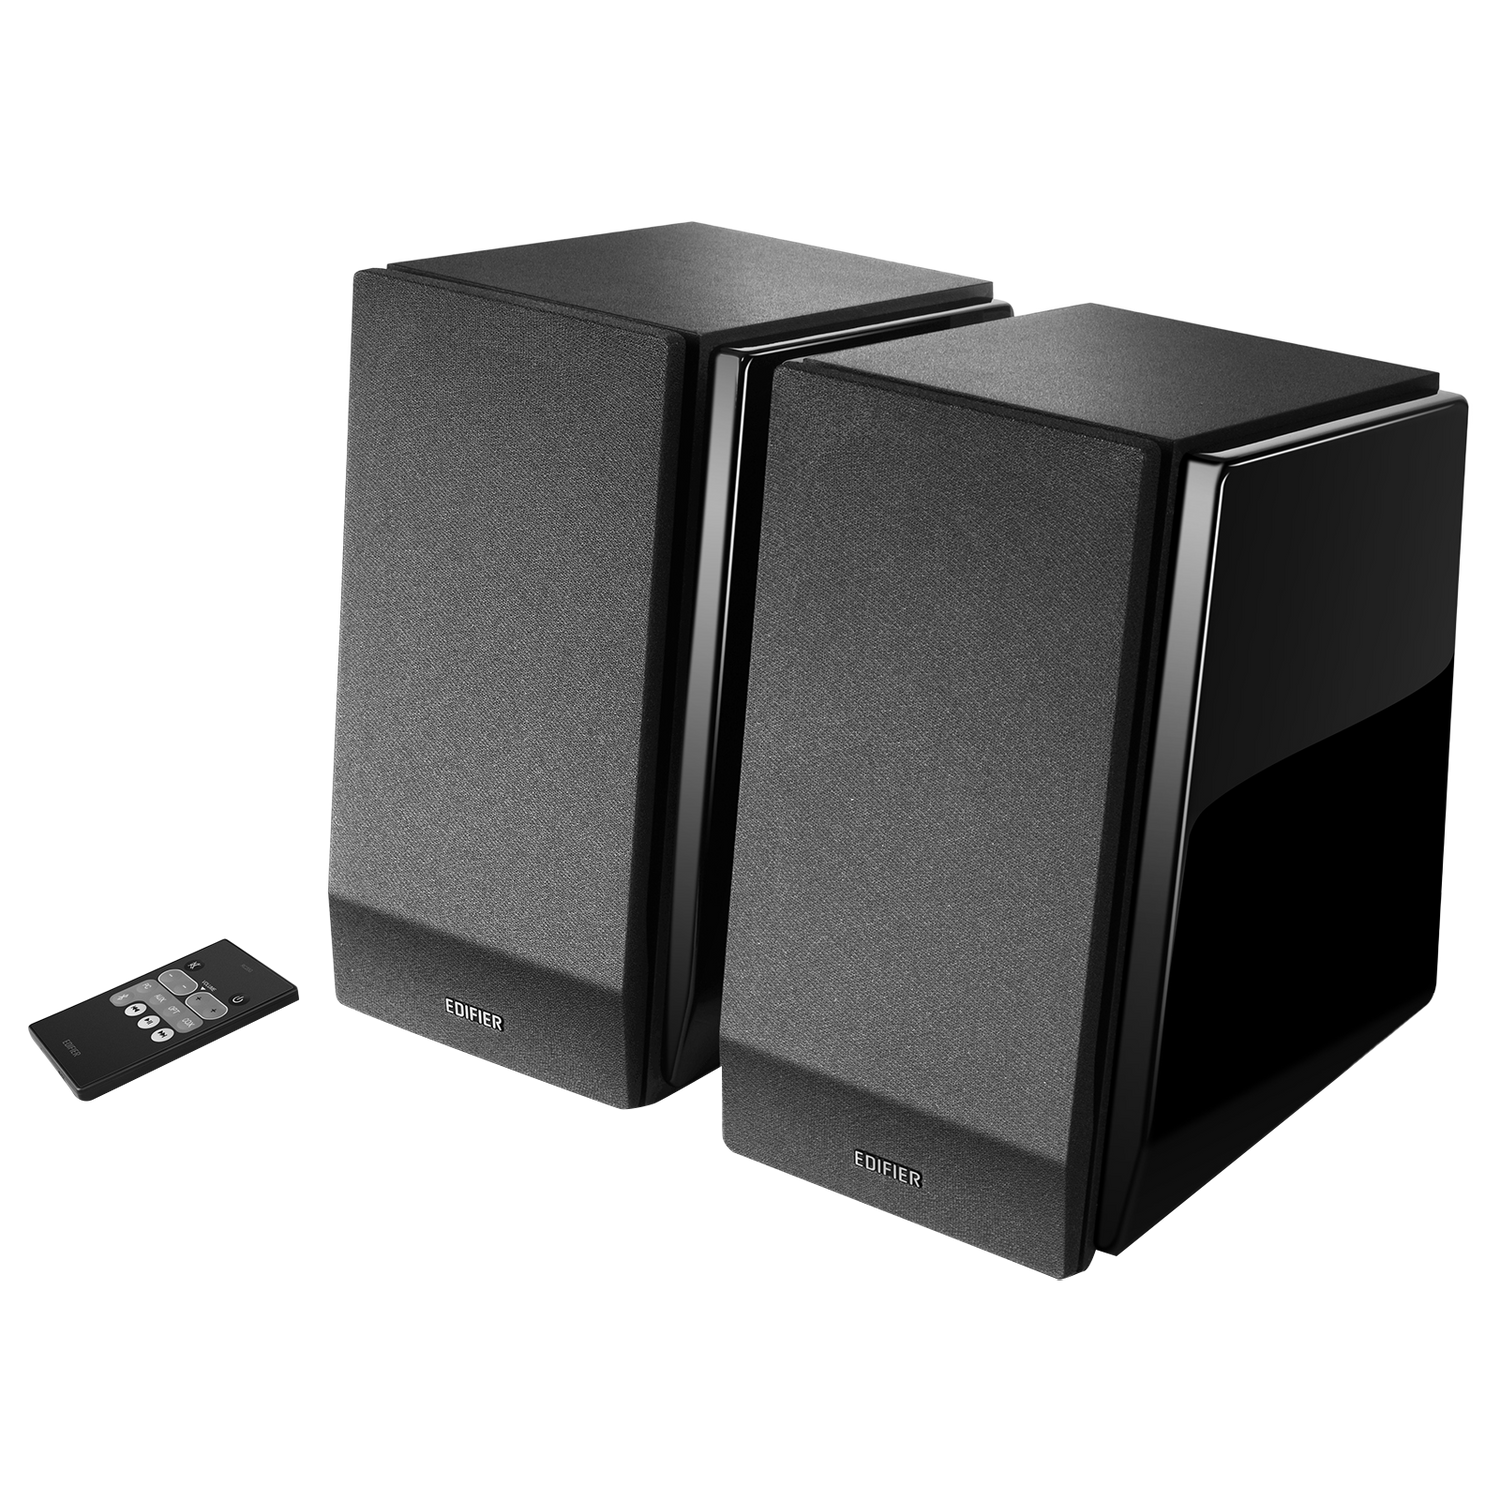 R1850DB Bookshelf Speakers Bookshelf Speakers with Subwoofer Out